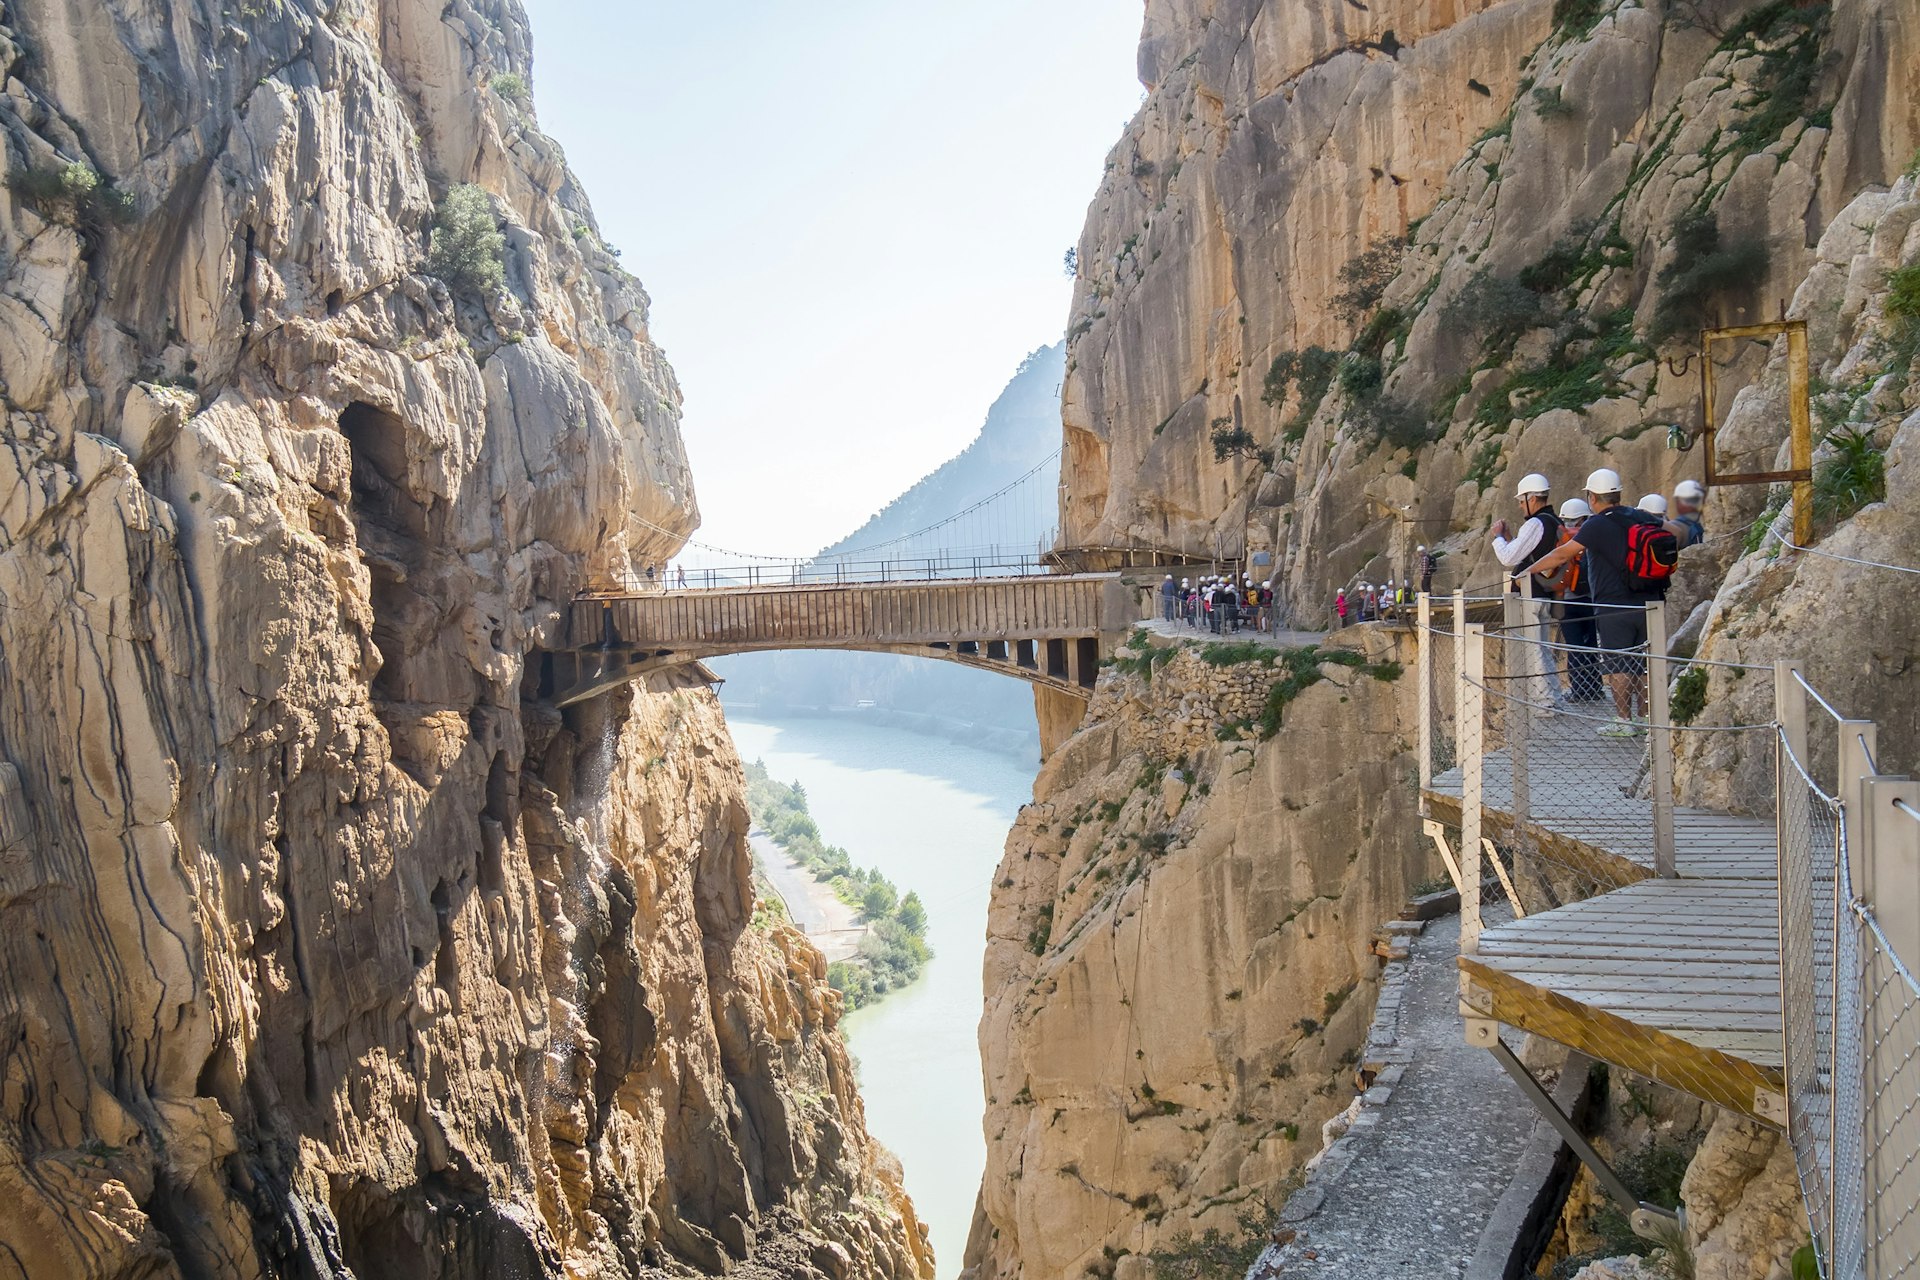 'El Caminito del Rey' (King's Little Path), World's Most Dangerous Footpath